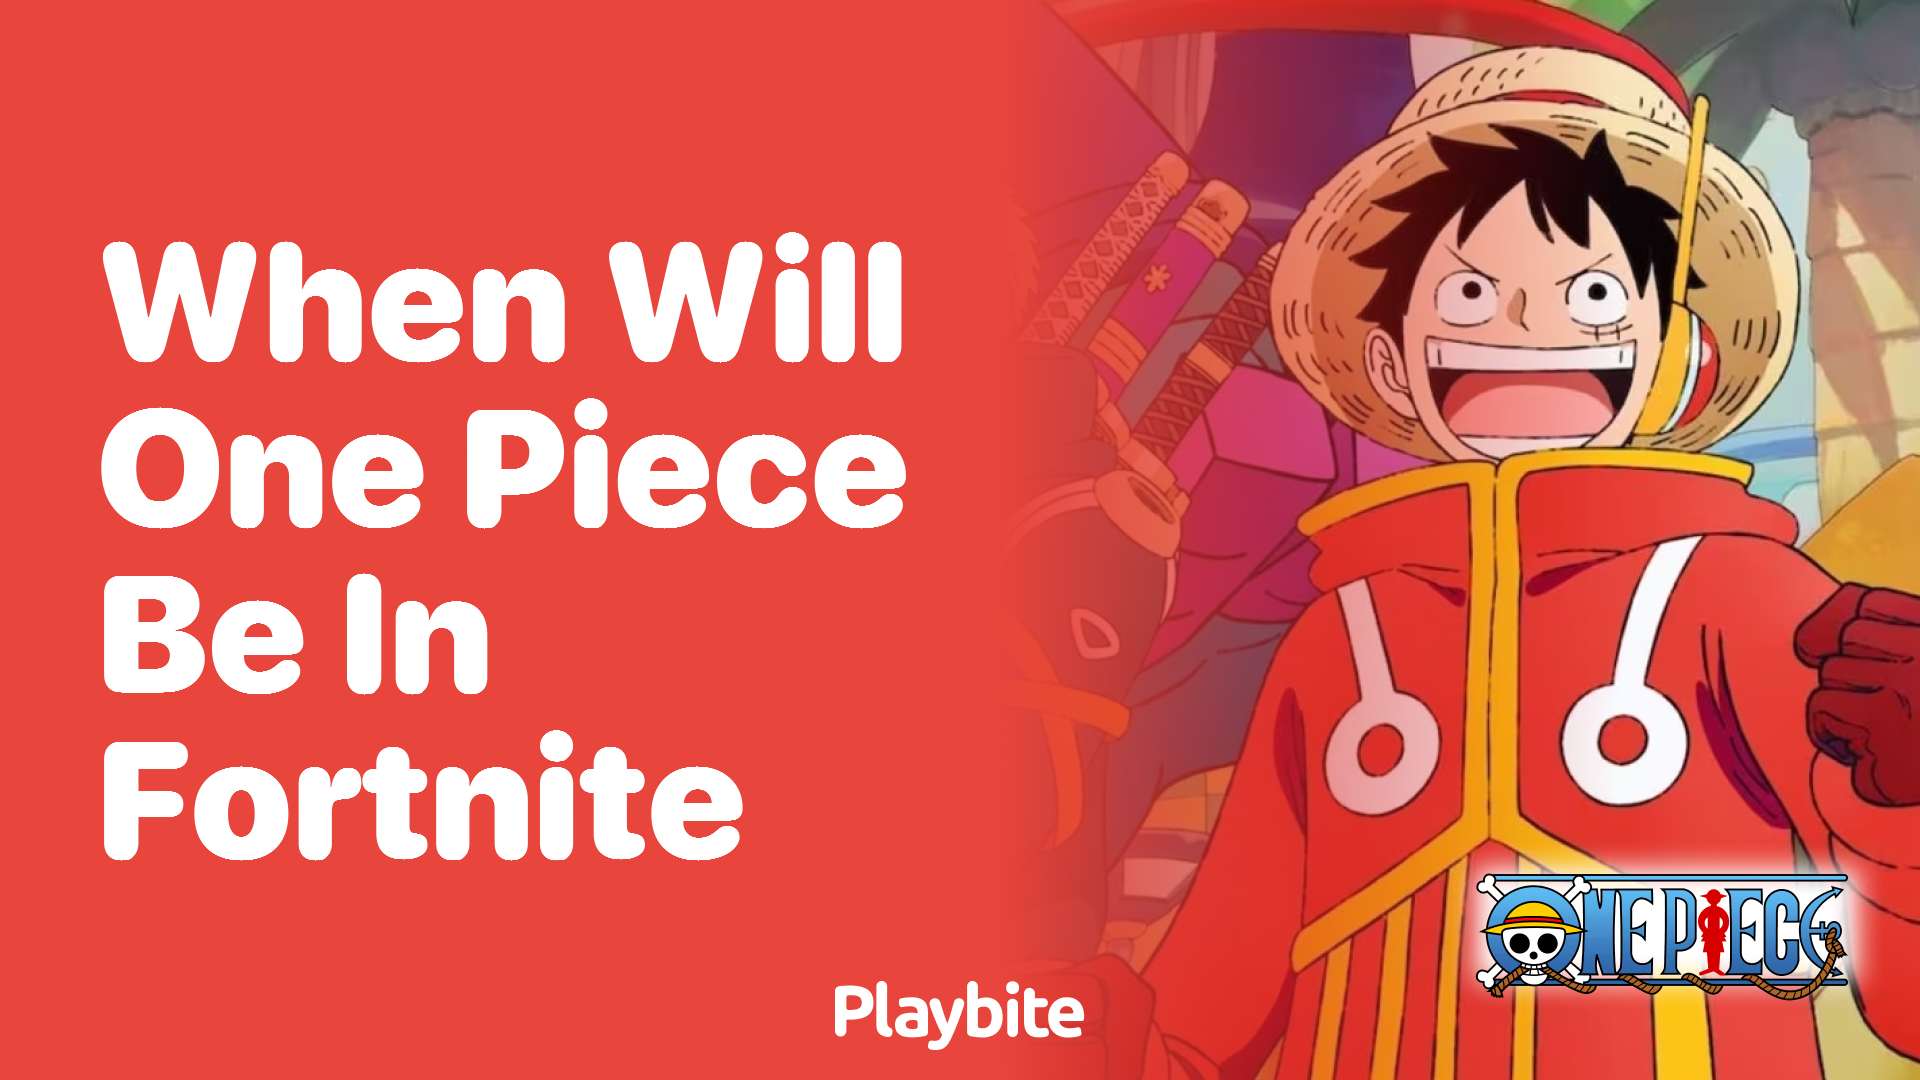 When will One Piece be in Fortnite?